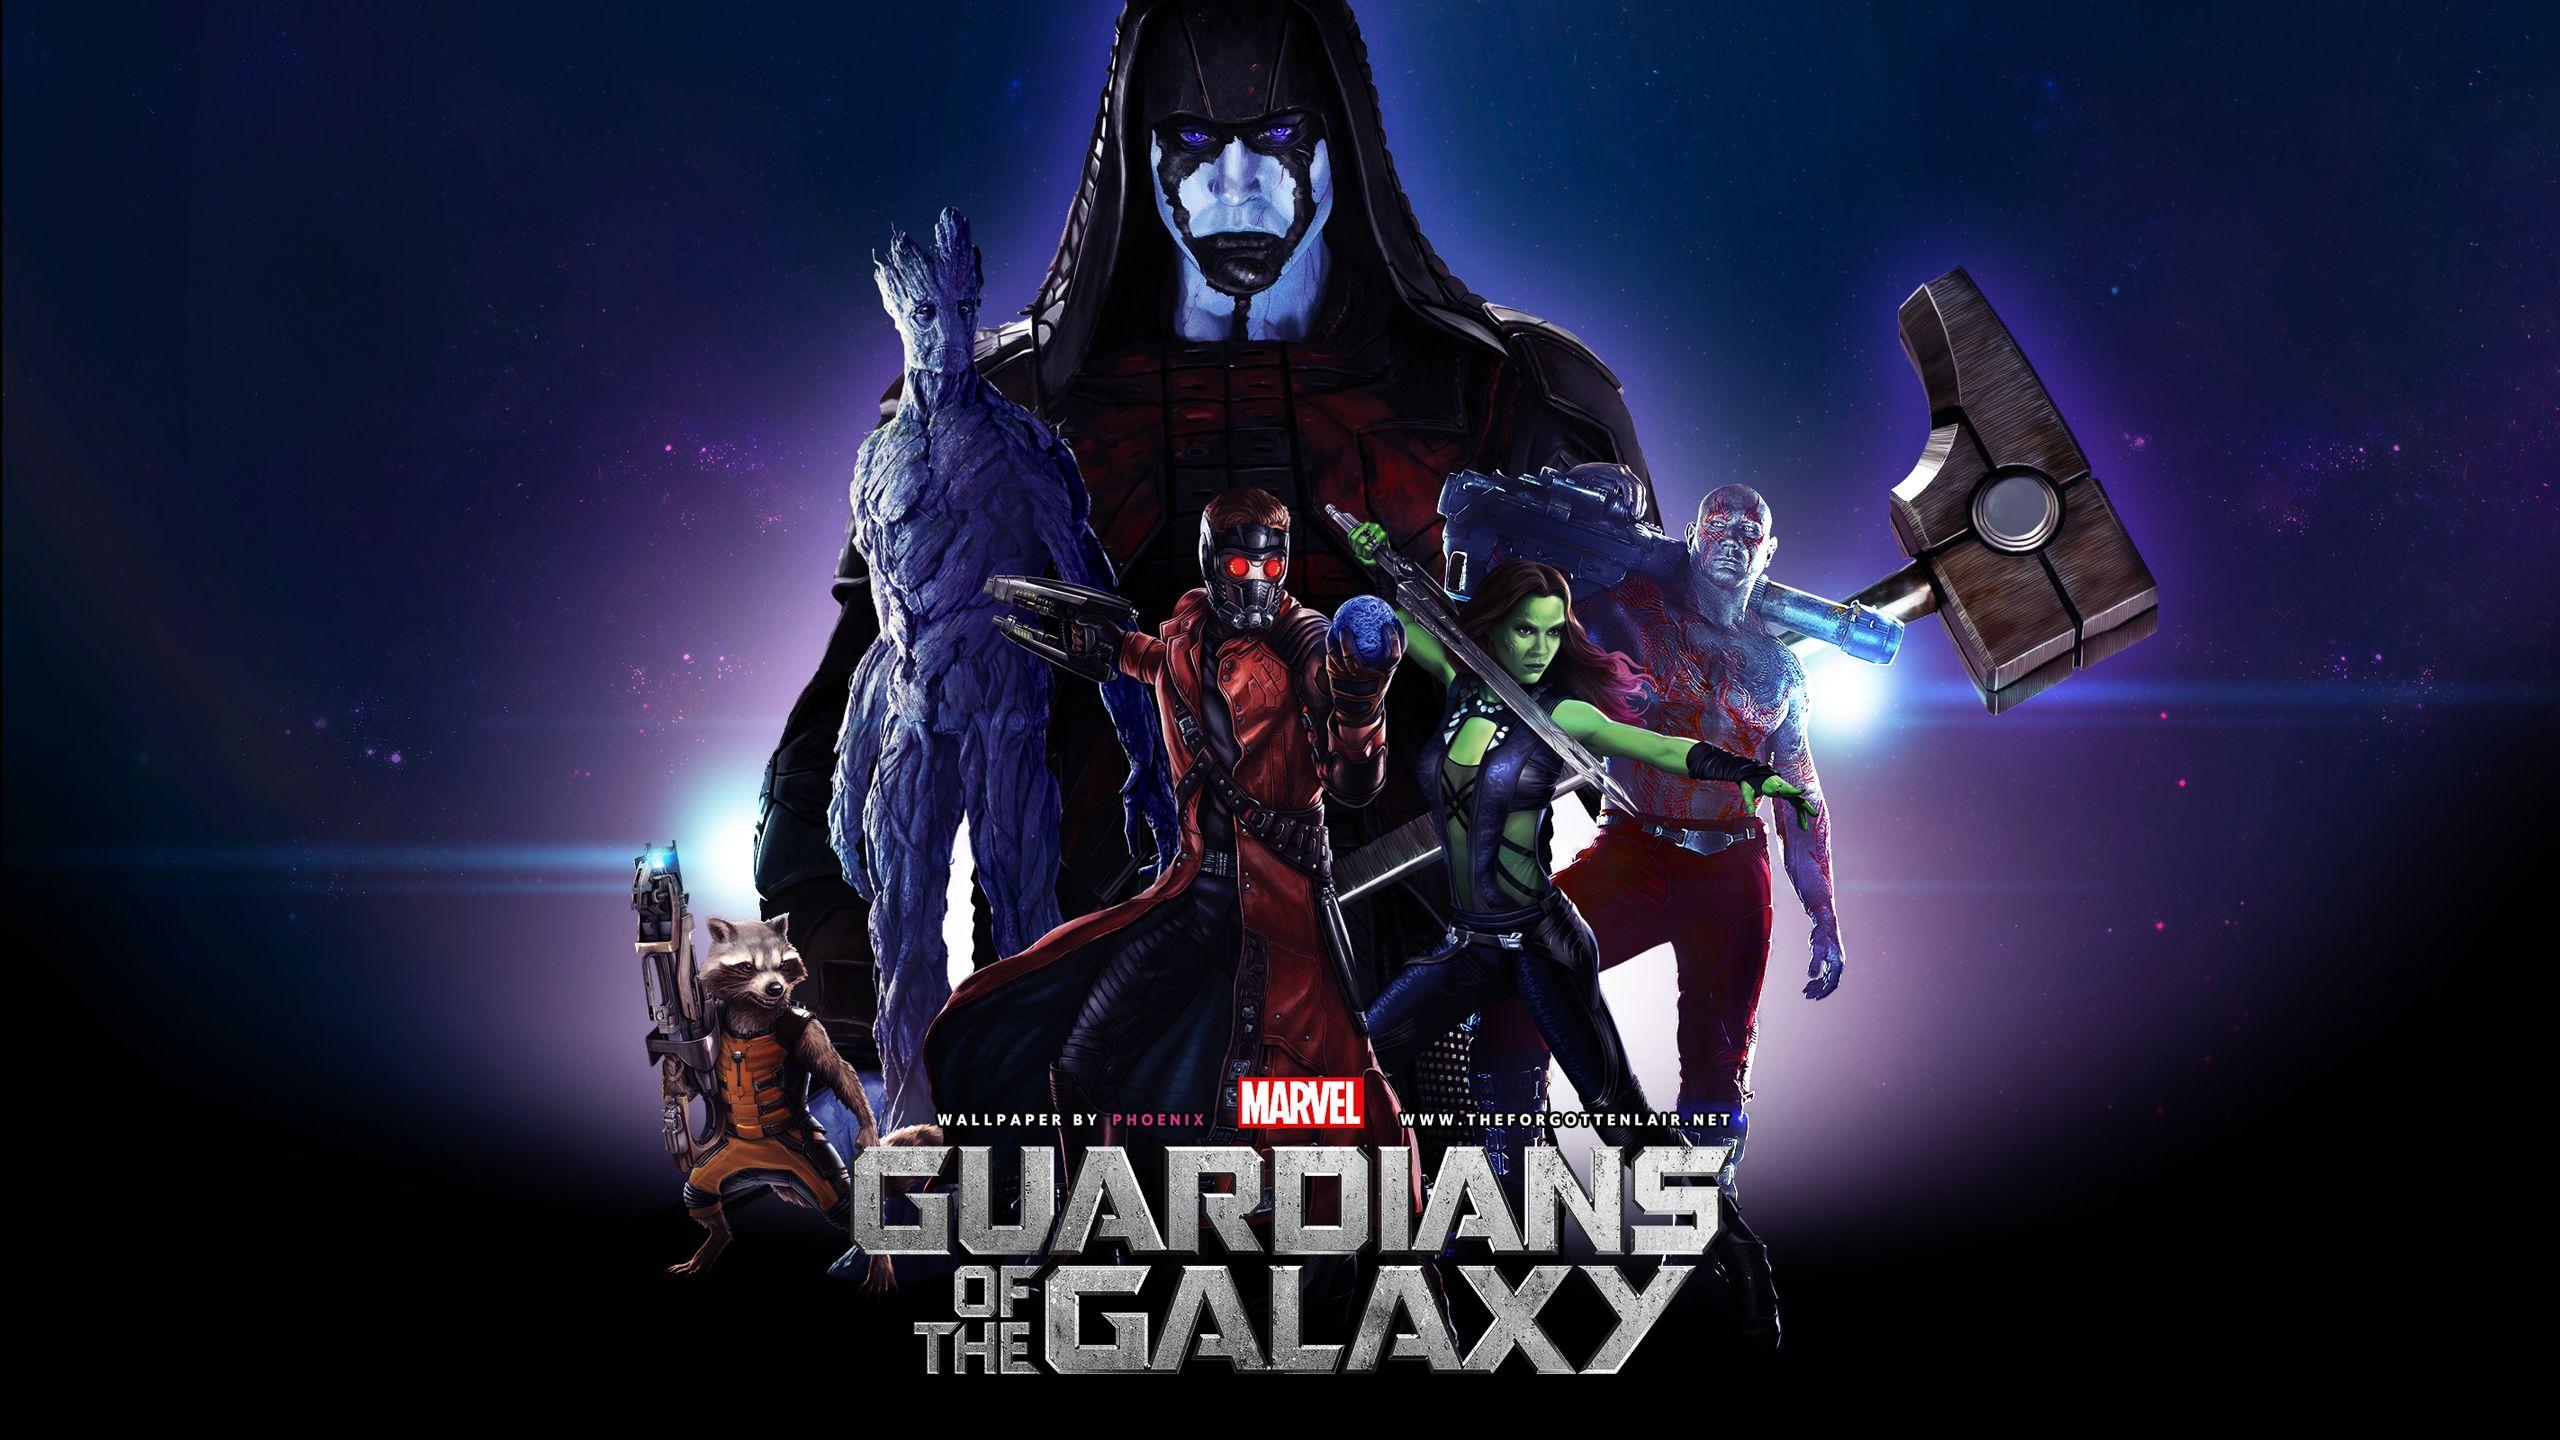 Guardians Of The Galaxy, Gamora, Drax The Destroyer, Star Lord